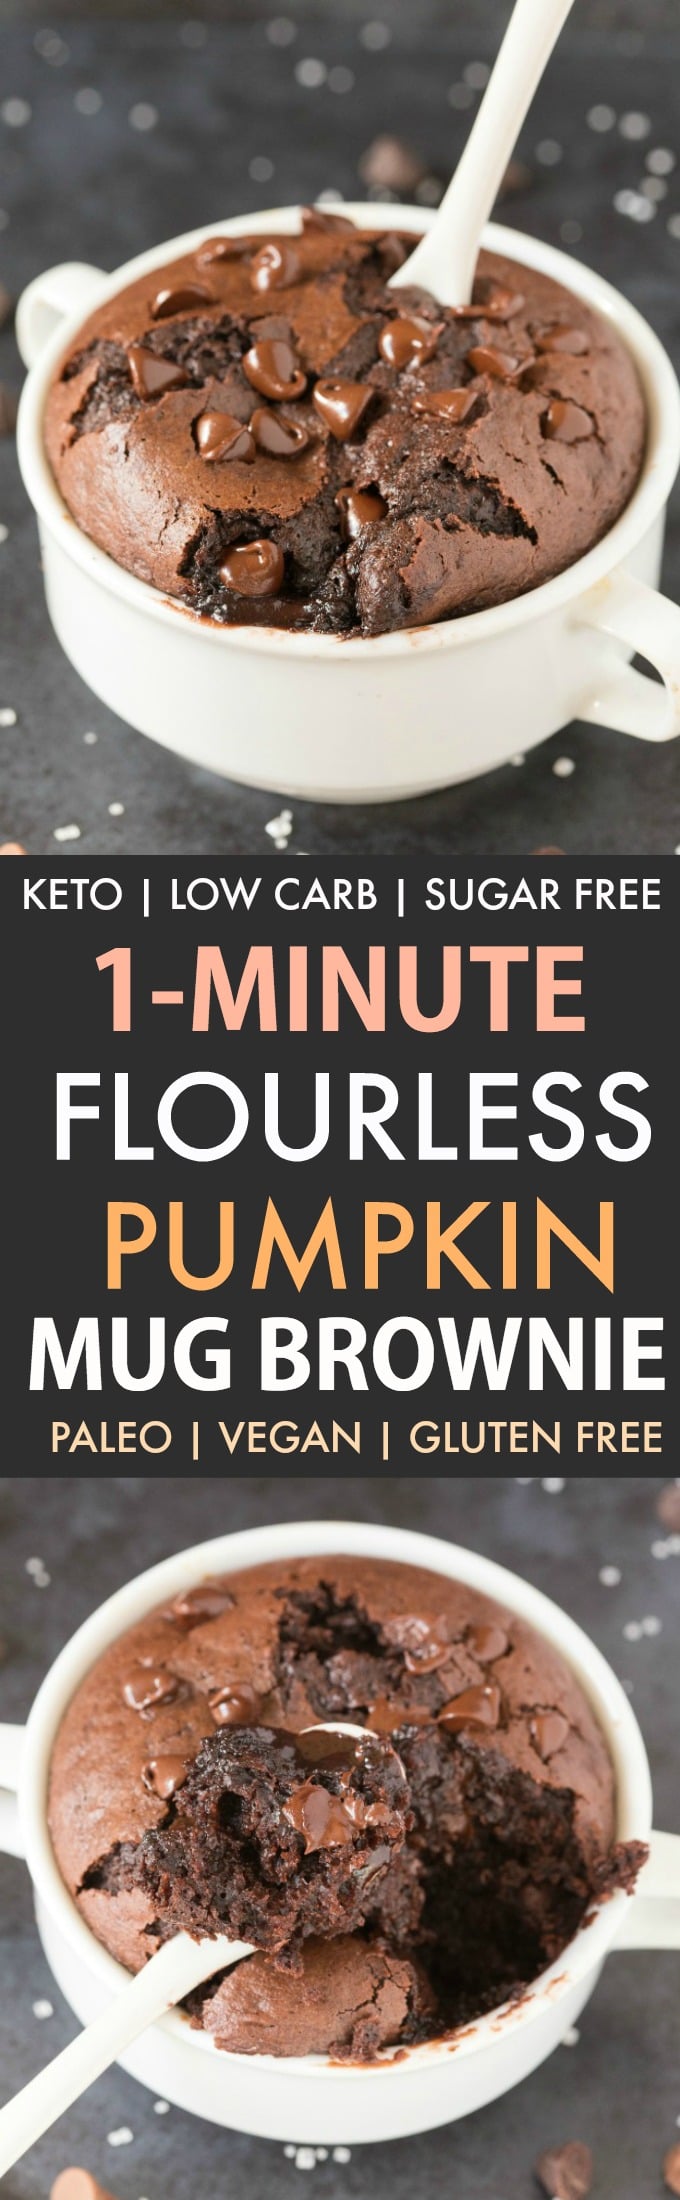 Healthy 1-Minute Flourless Mug Brownie in a collage